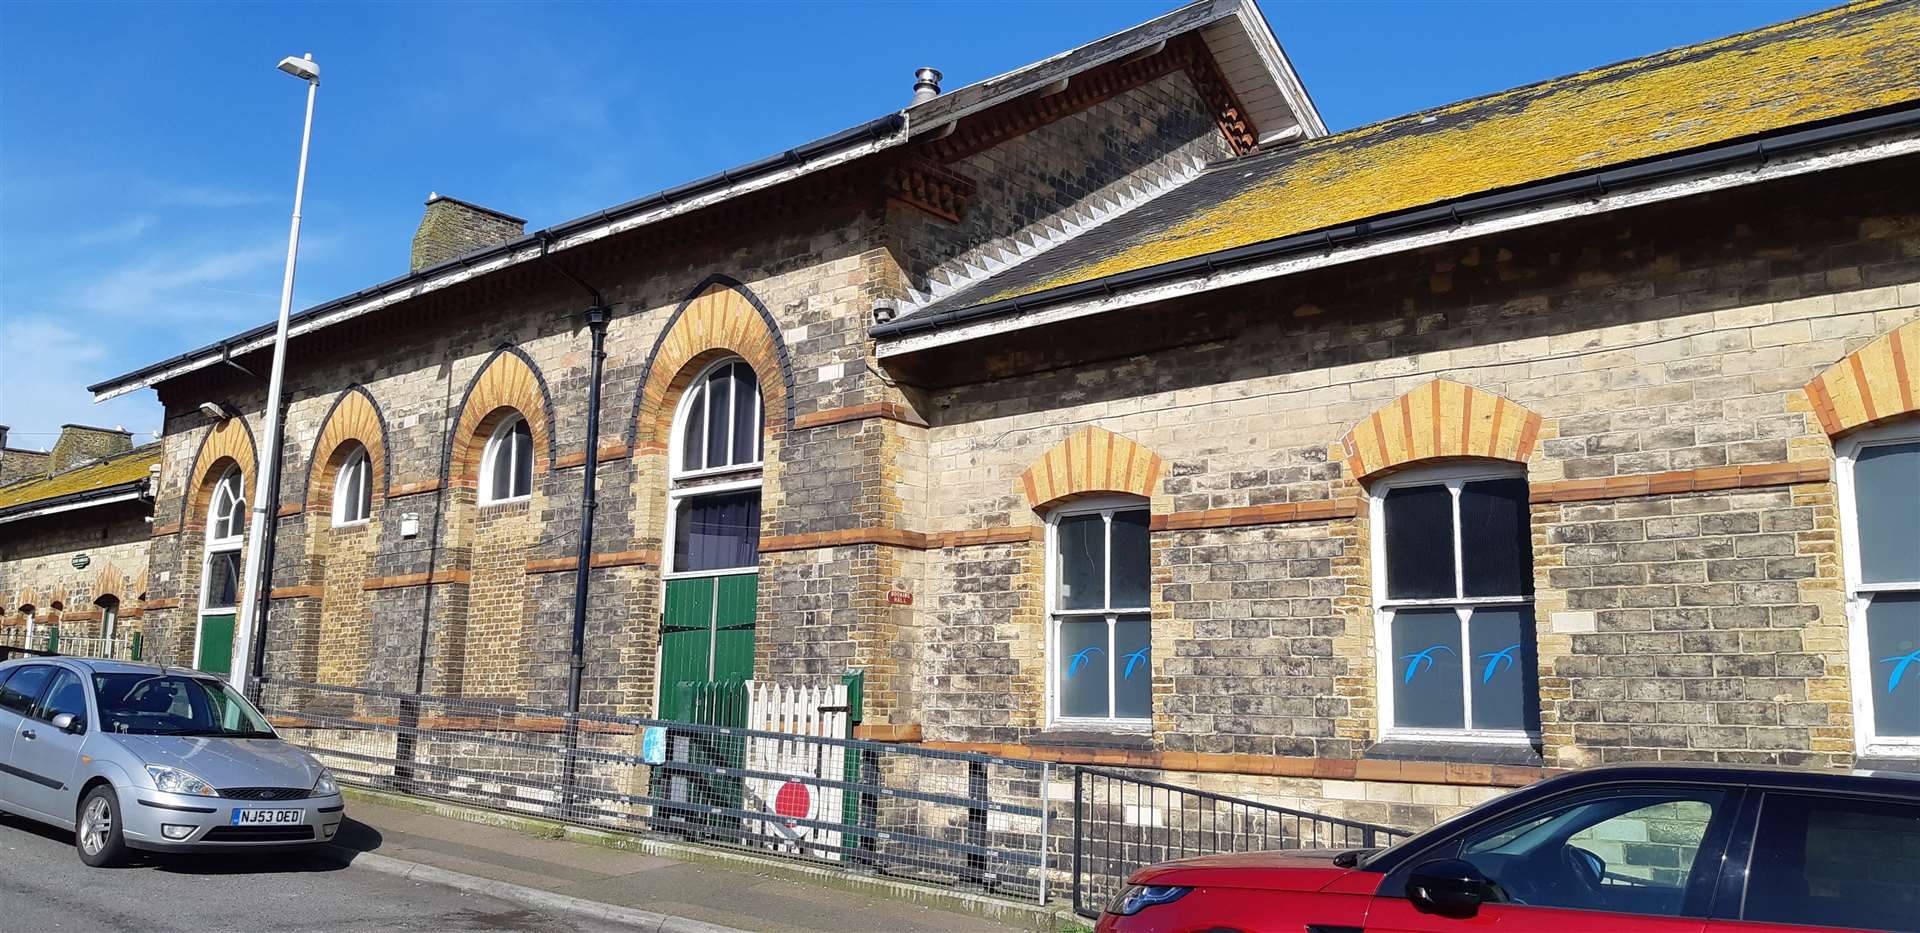 The incident happened at the Booking Hall in Dover